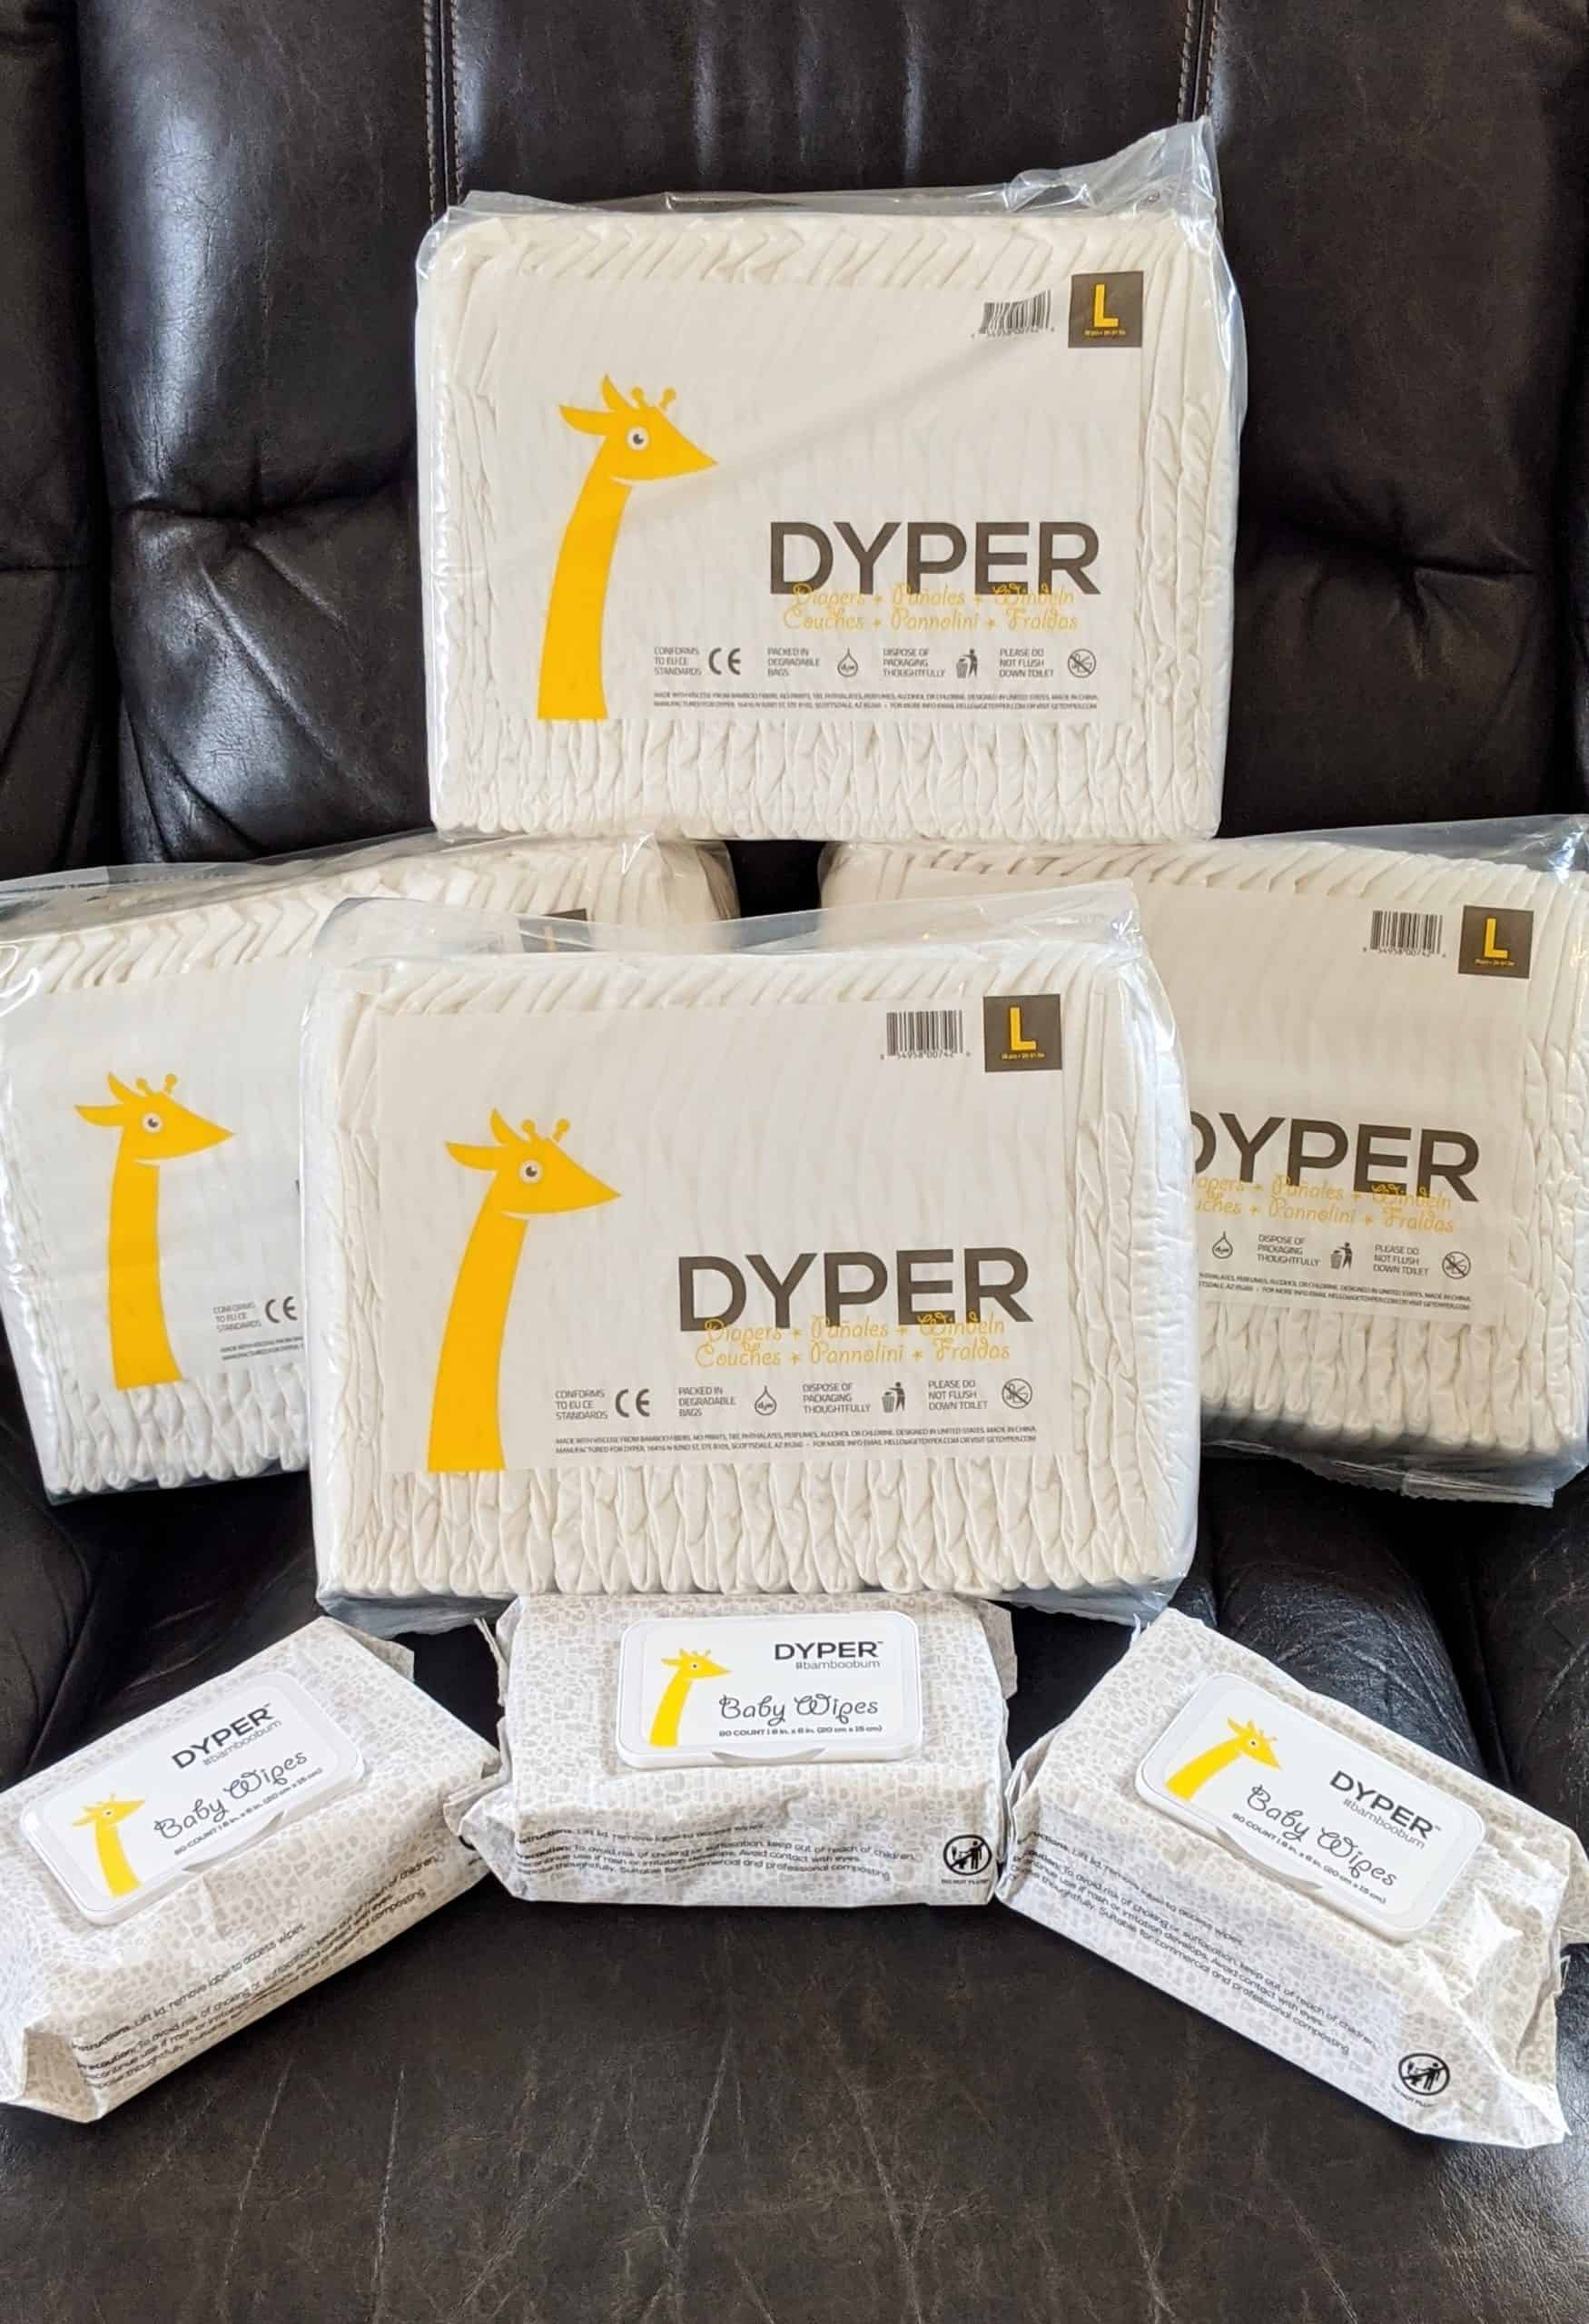 Dyper products